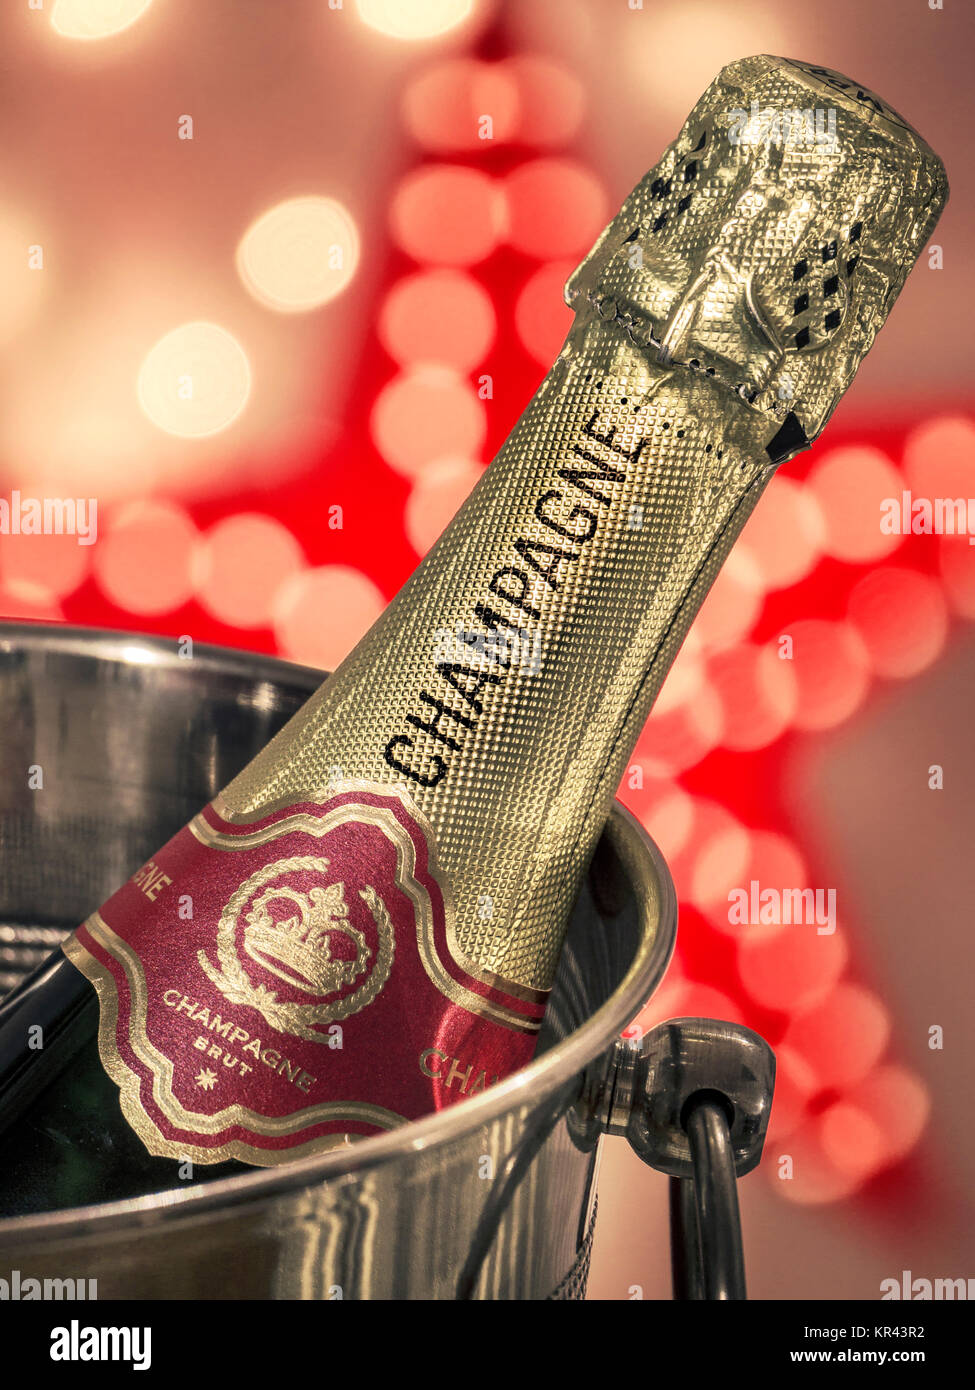 CHAMPAGNE CHRISTMAS PARTY LIGHTS Champagne bottle on ice in wine cooler with festive star and sparkling celebration lights Stock Photo